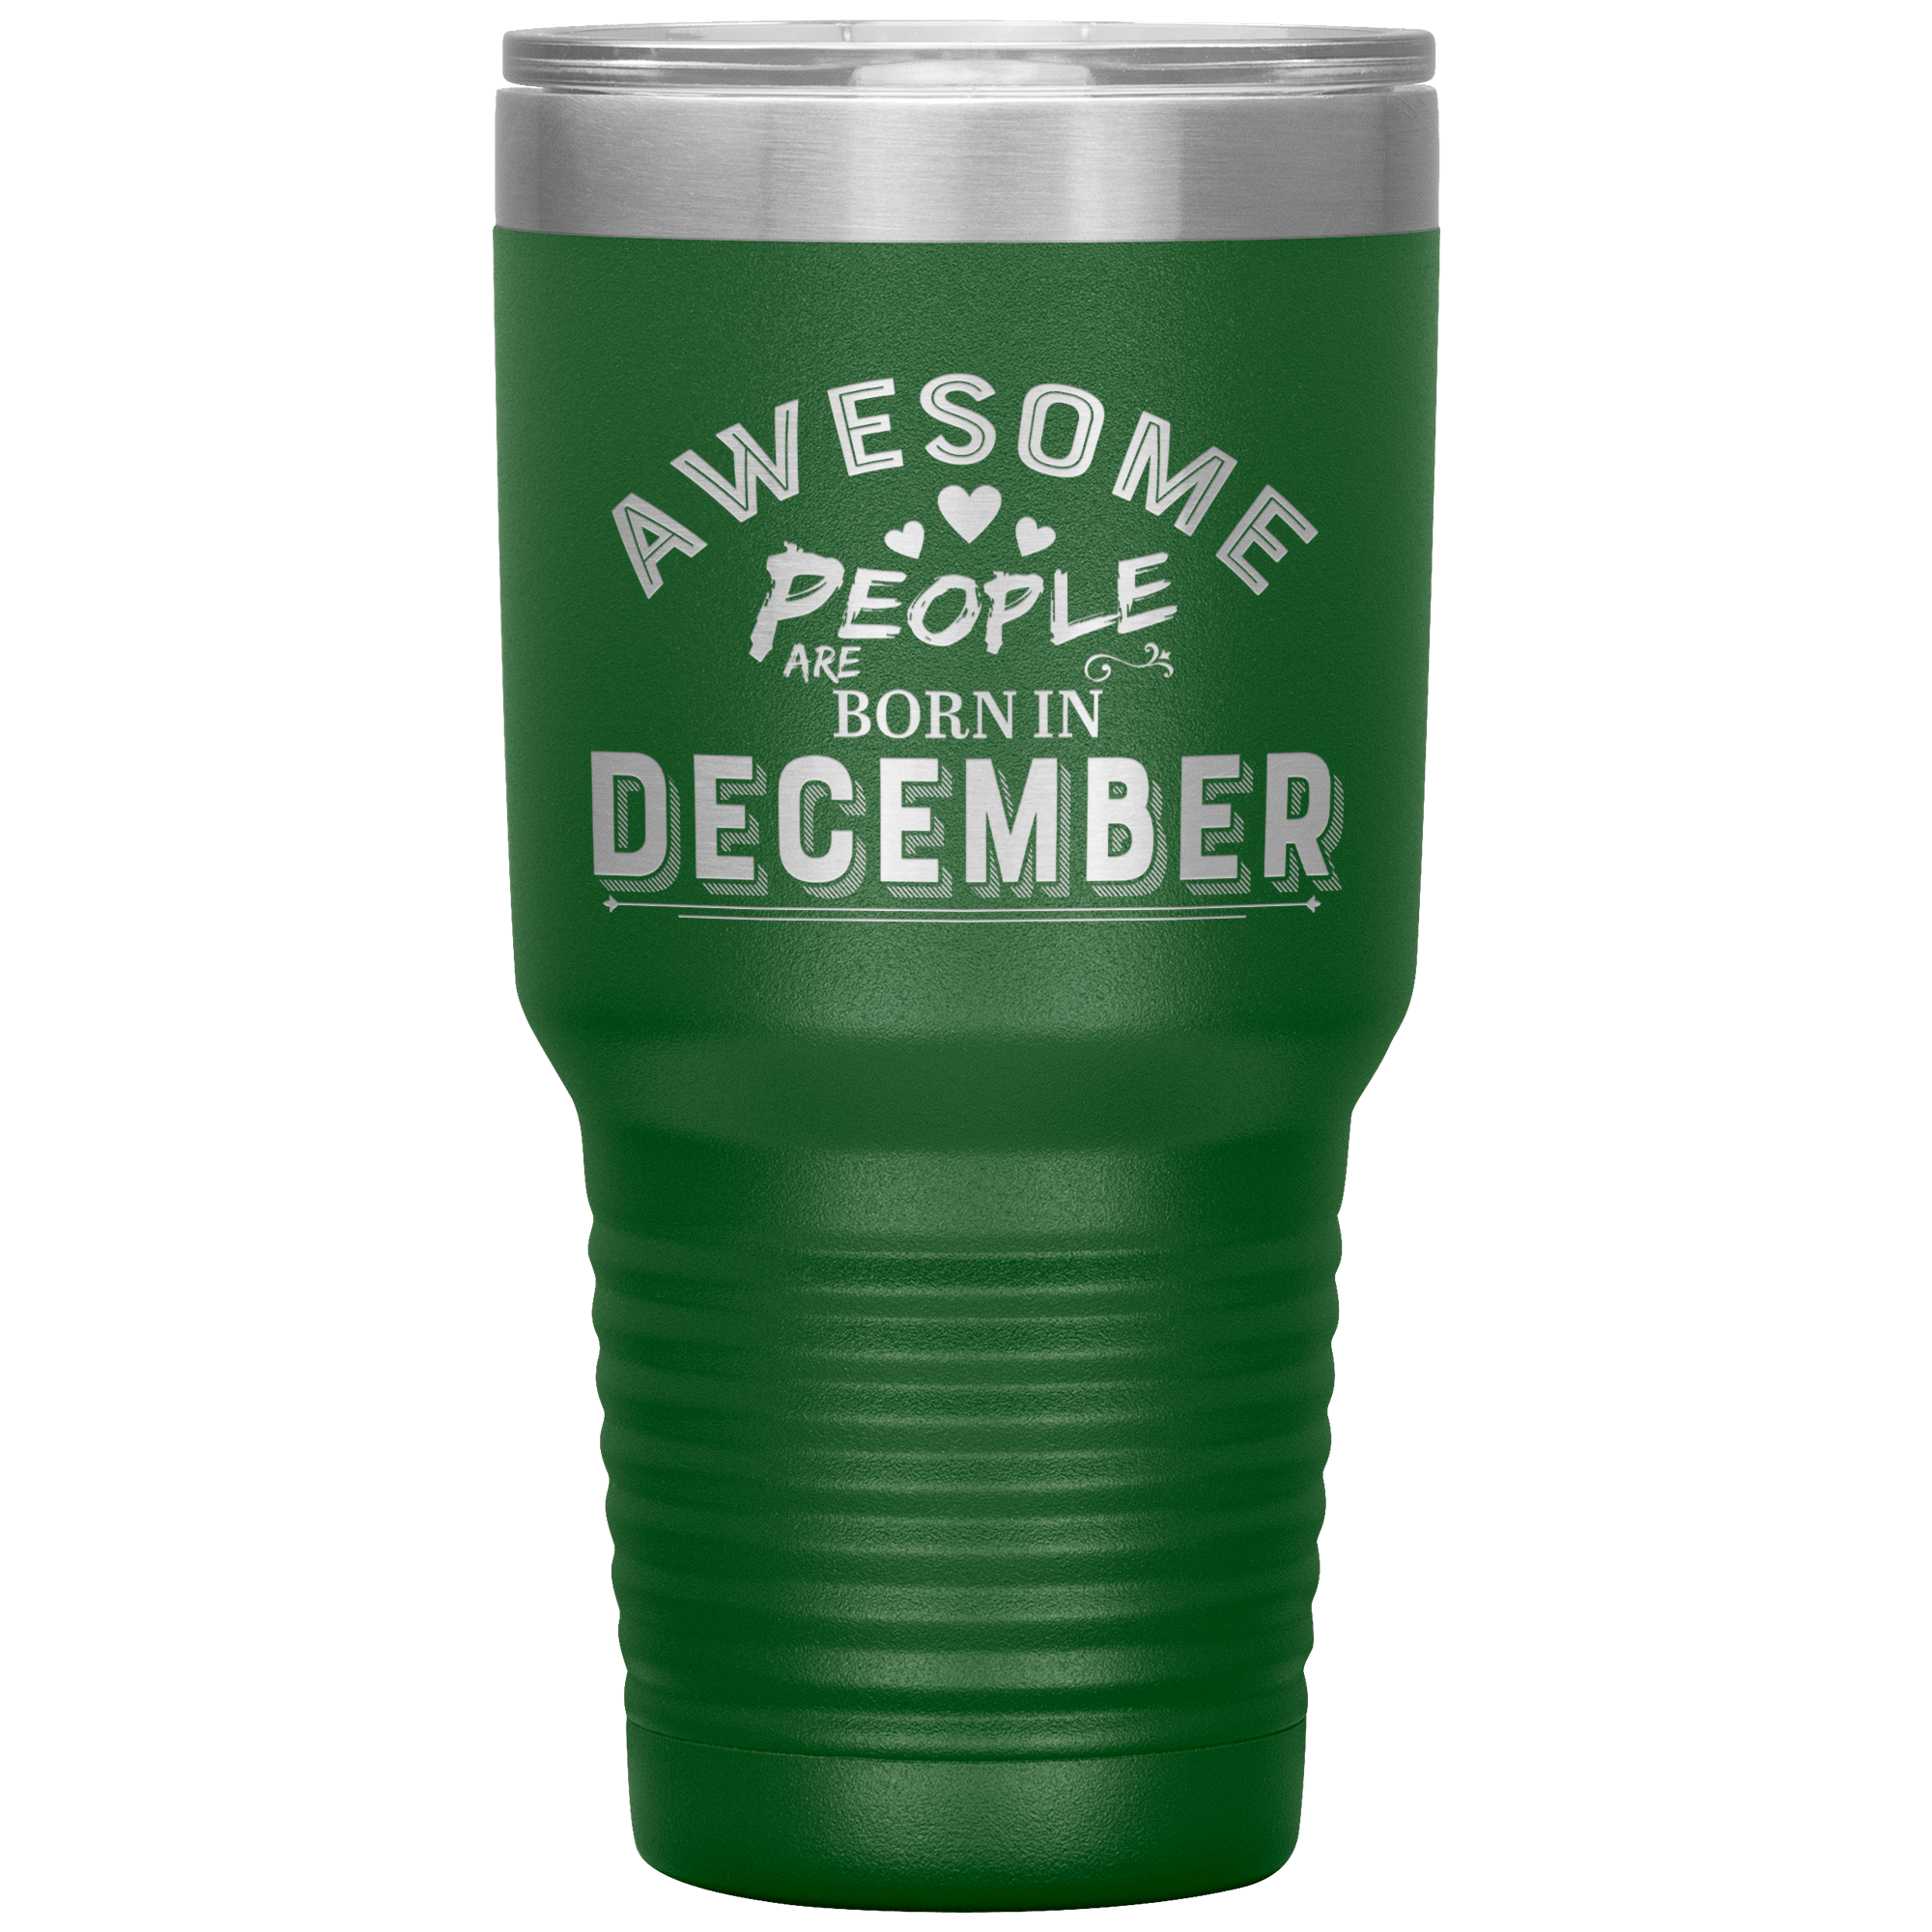 "AWESOME PEOPLE ARE BORN IN DECEMBER" Tumbler